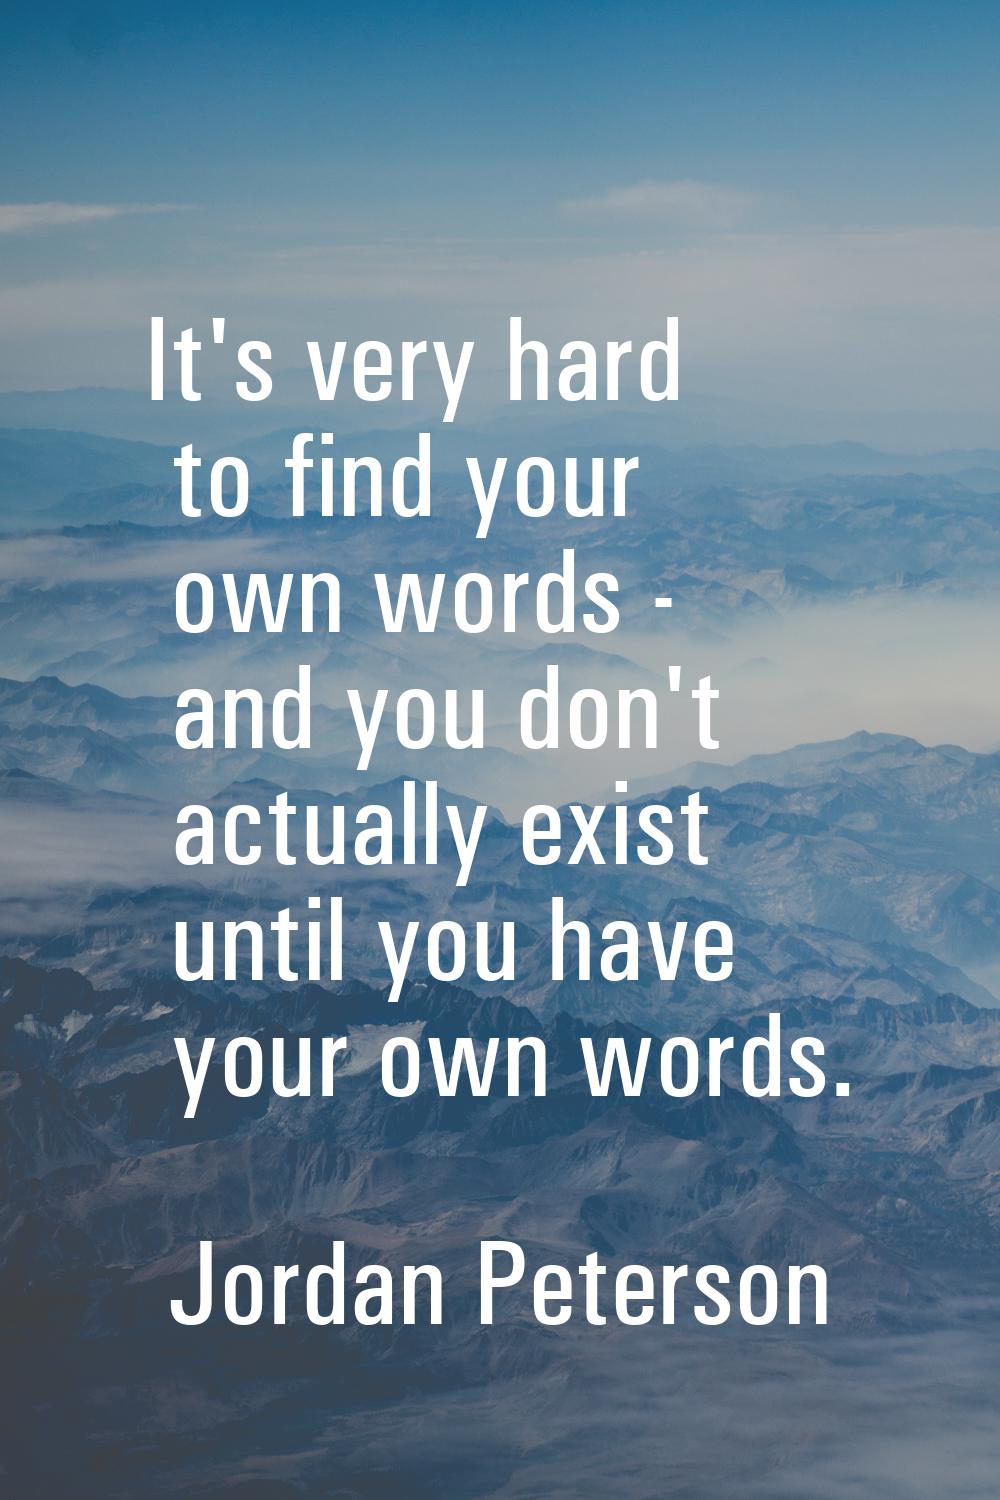 It's very hard to find your own words - and you don't actually exist until you have your own words.